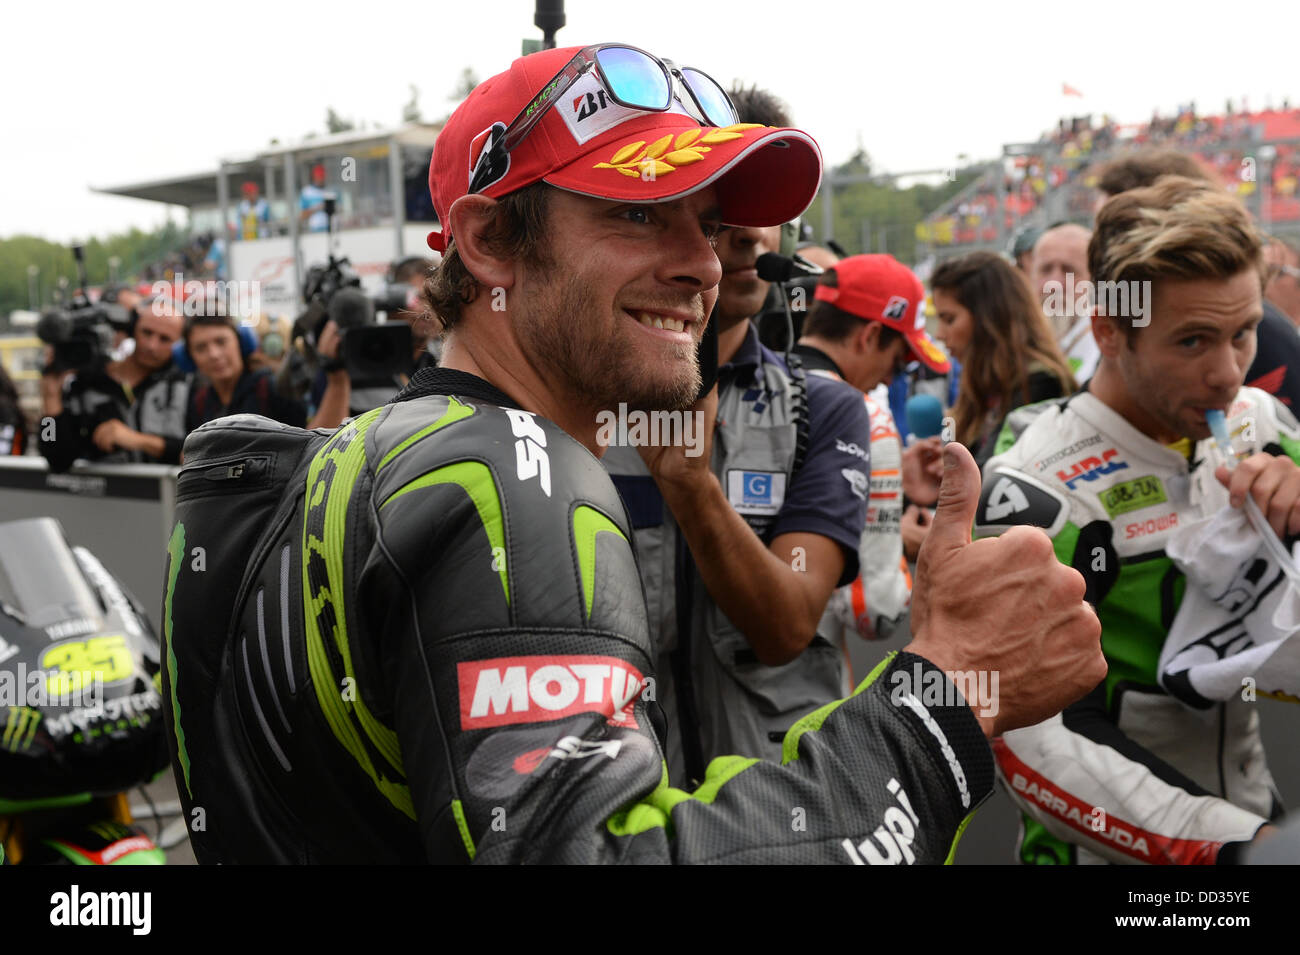 Brno, Czech Republic.24th August 2013.Cal Crutchlow (Monster Yamaha Tech3) during the qualifying session at Brno circuit Credit:  Gaetano Piazzolla/Alamy Live News Stock Photo